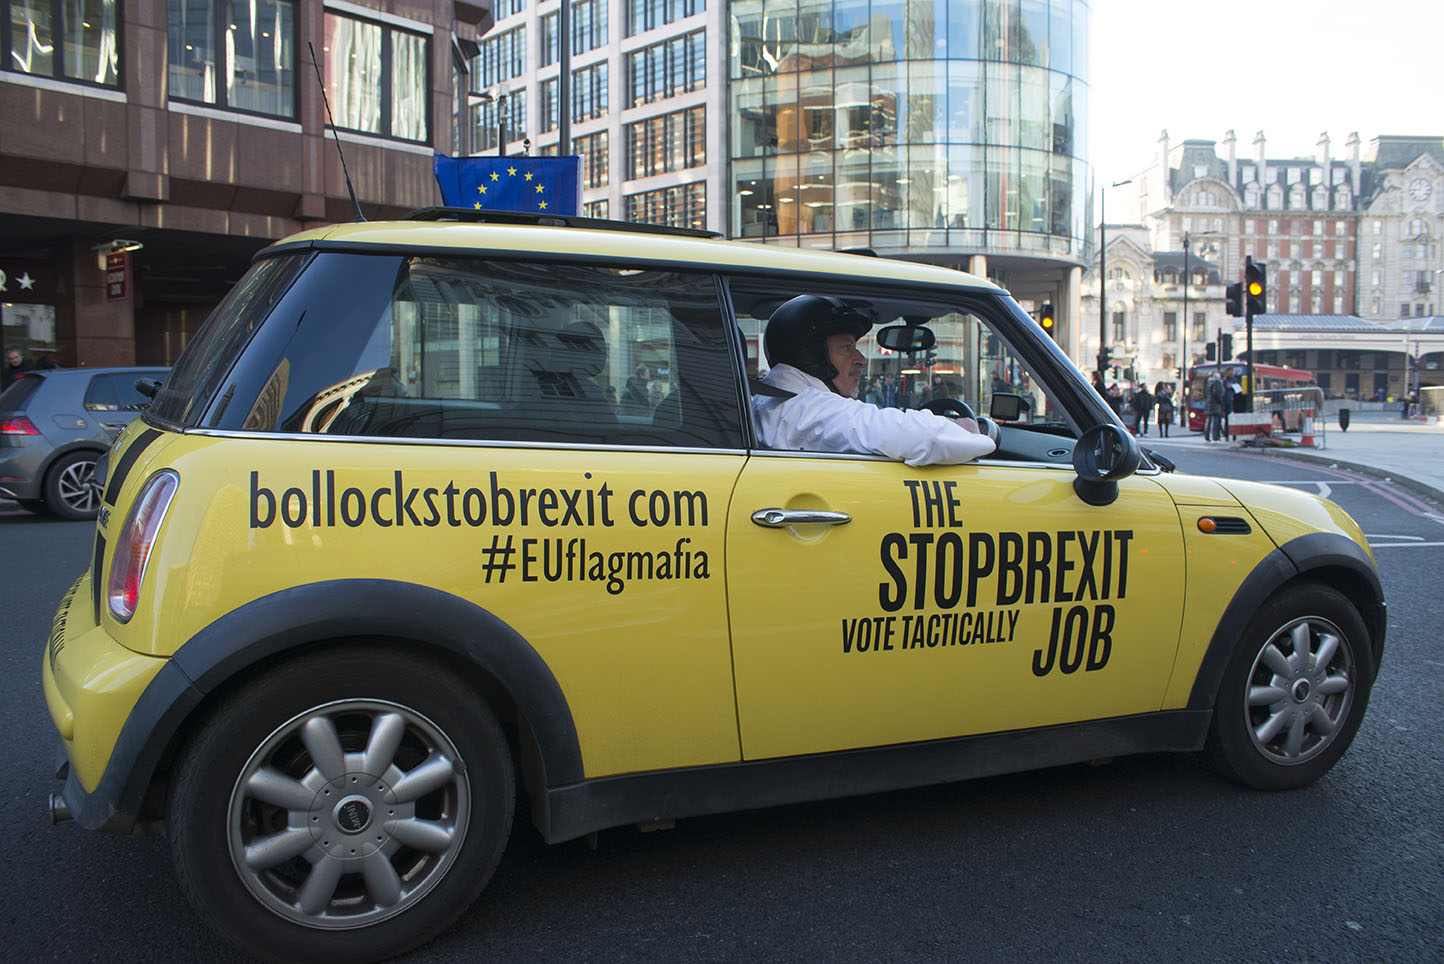 3 Dec 2019 - London, UK - Protest minis visit he streets of London in a stunt organised and crowdfunded by anti-brexit campaigning group EU Flag Mafia.